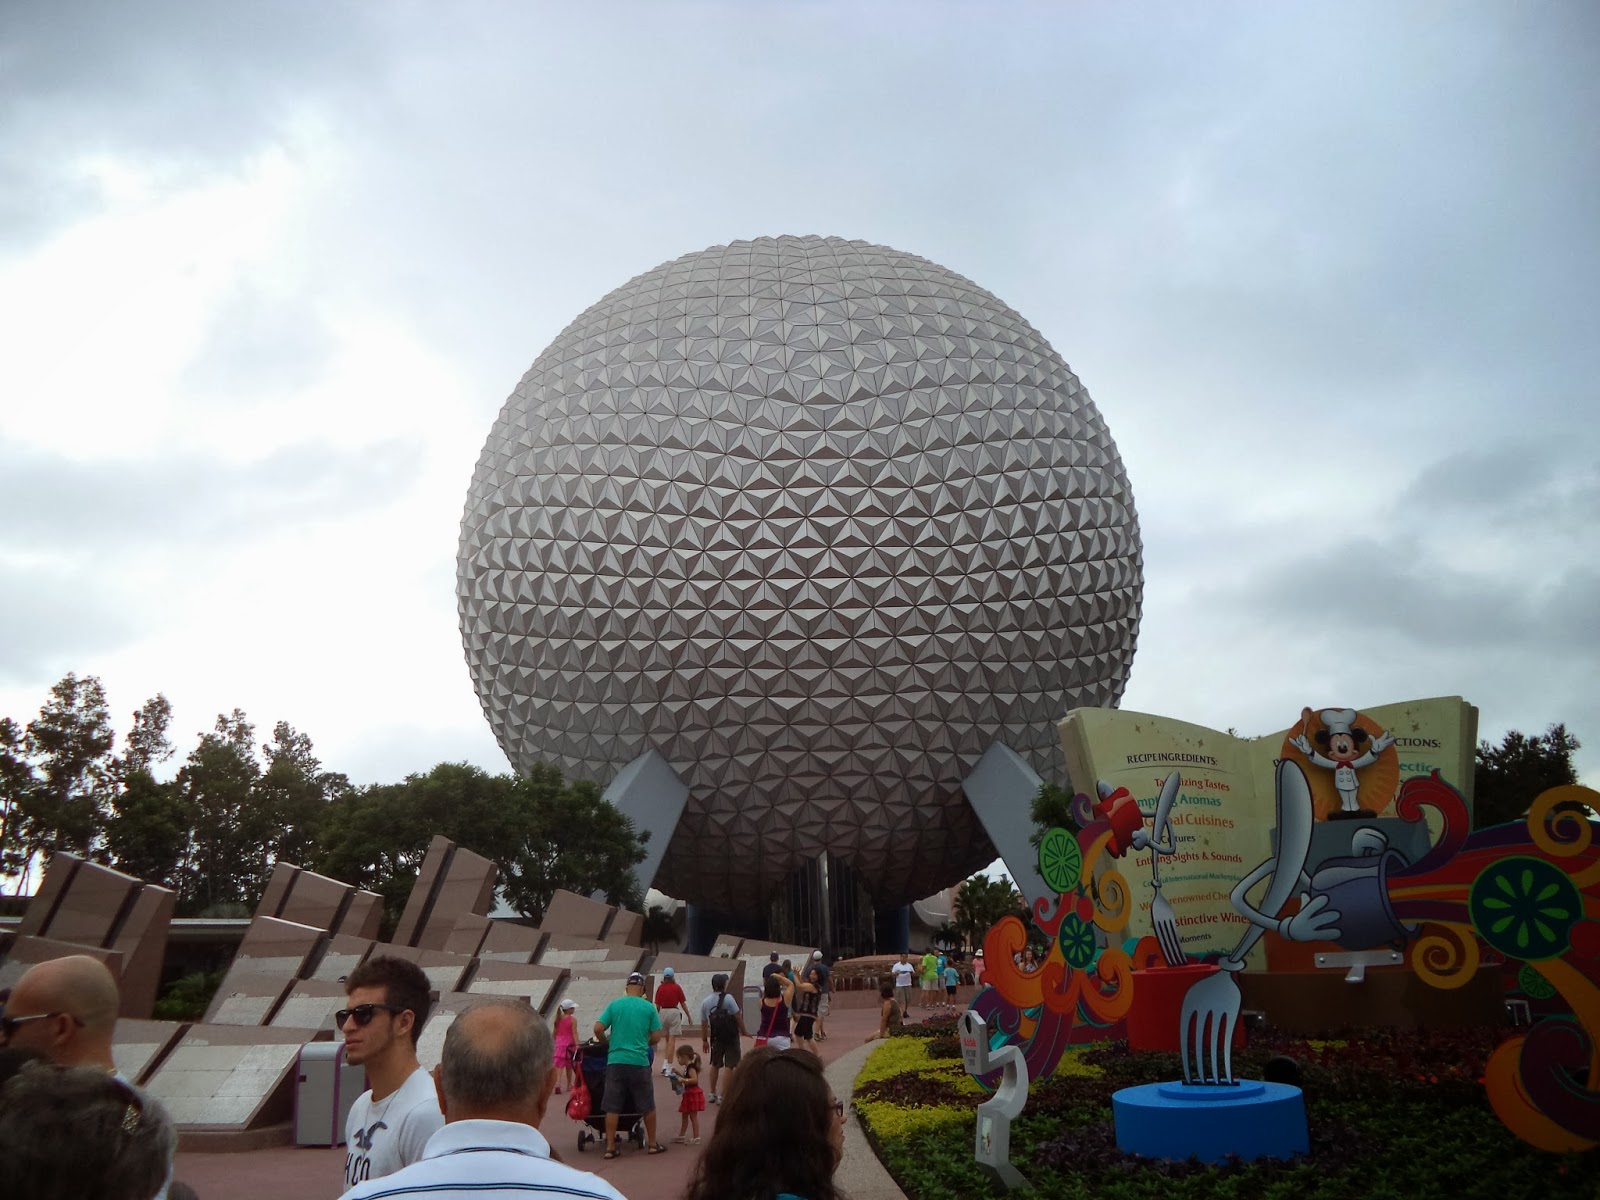 The Florida Dine and Dash: The 2013 Epcot Food and Wine Rendezvous